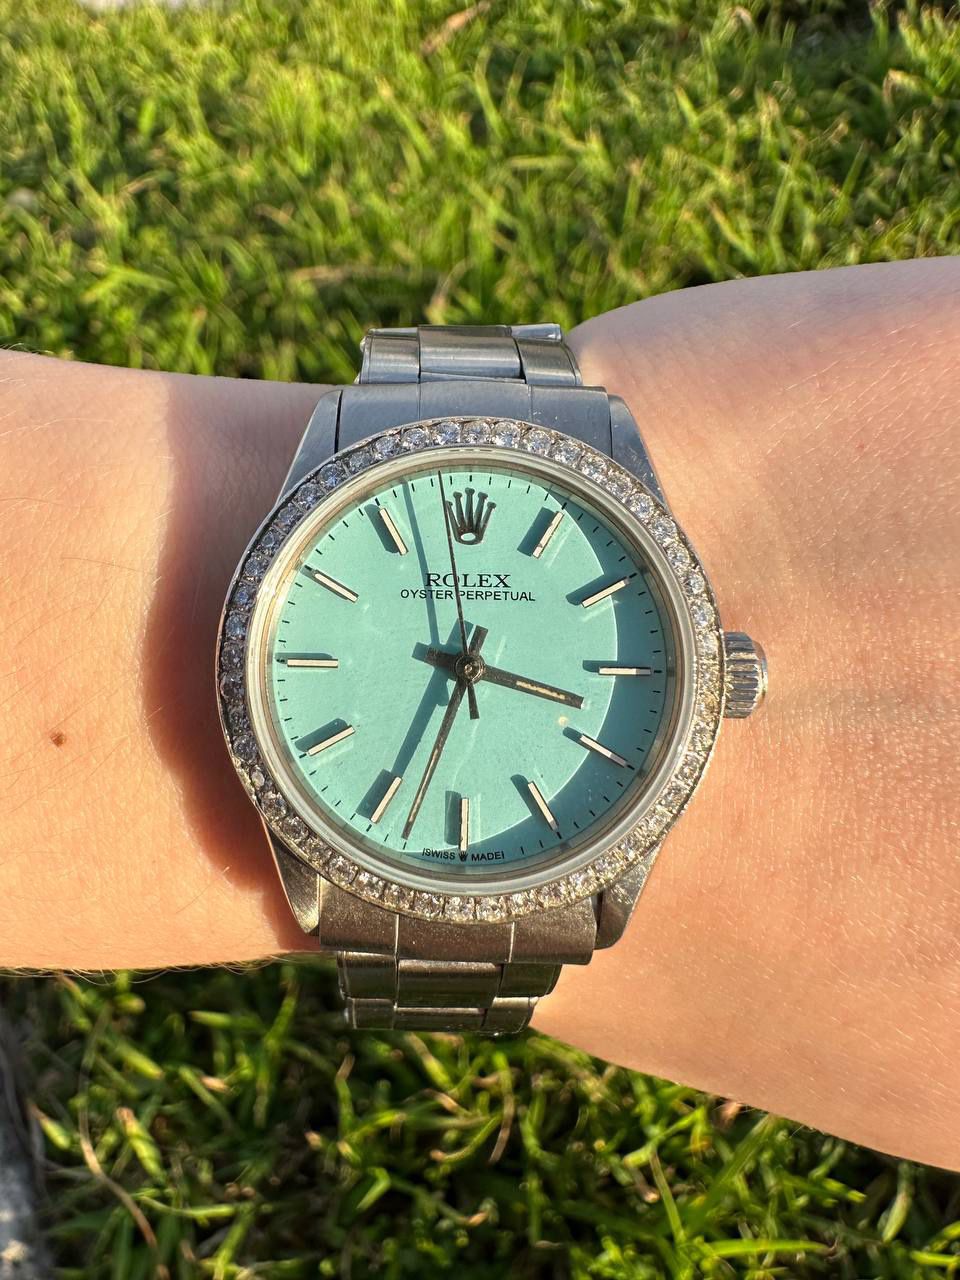 Rolex Oyster Perpetual 31mm stainless steel Tiffany blue dial diamond bezel